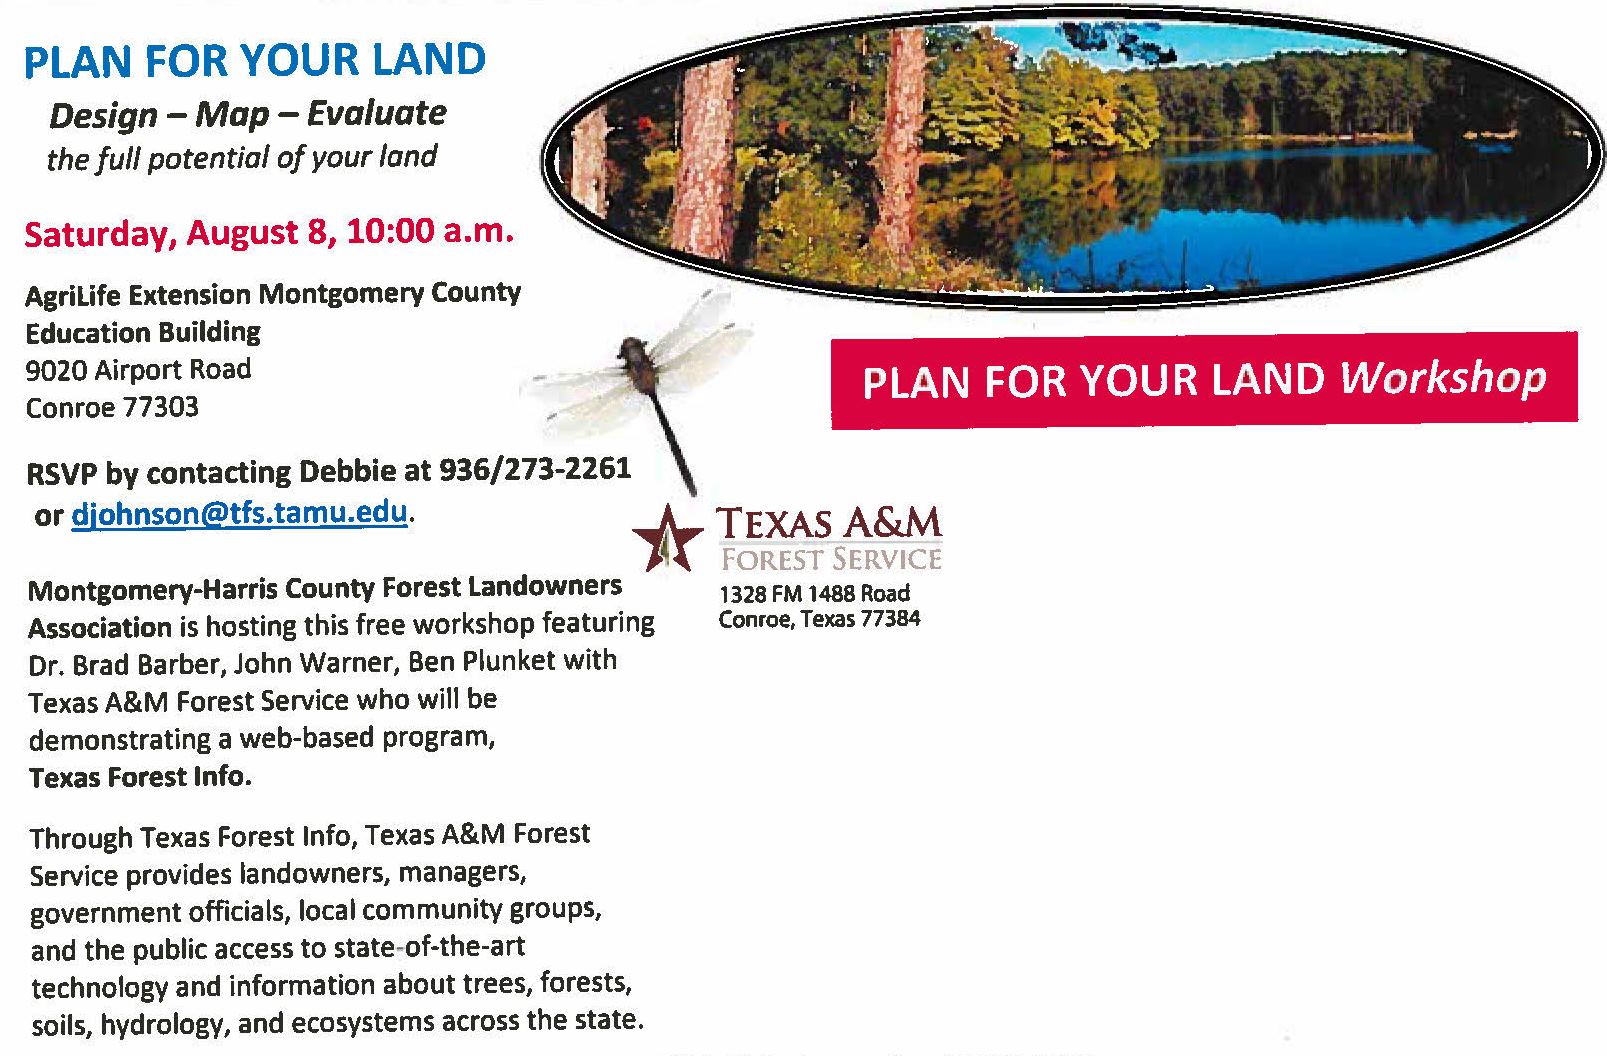 Plan for land graphic 8-8-15 conroe